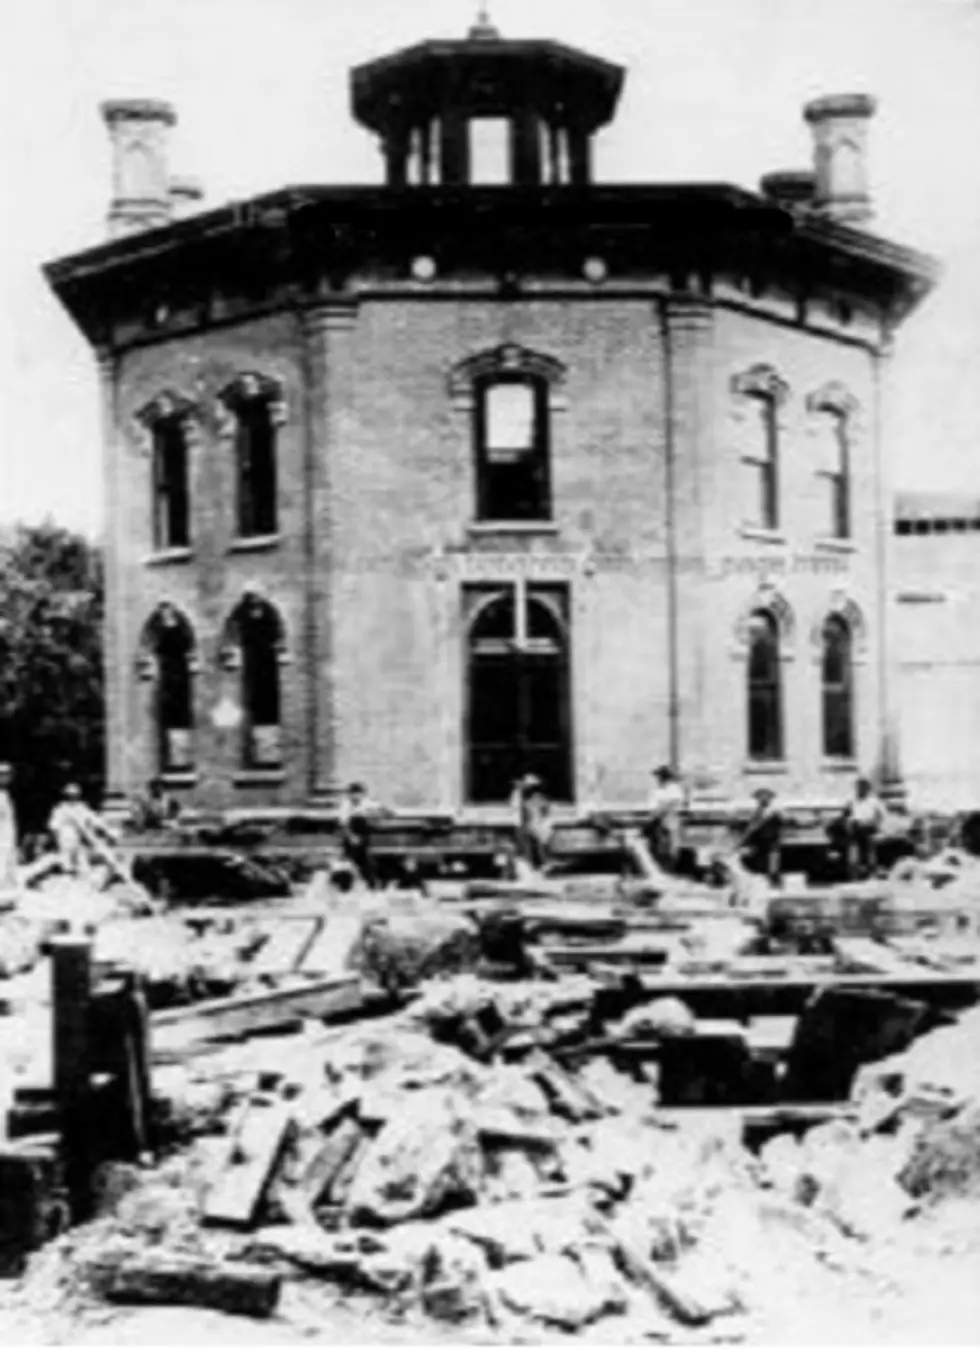 Downtown Lansing’s Octagon House, 1854-1929